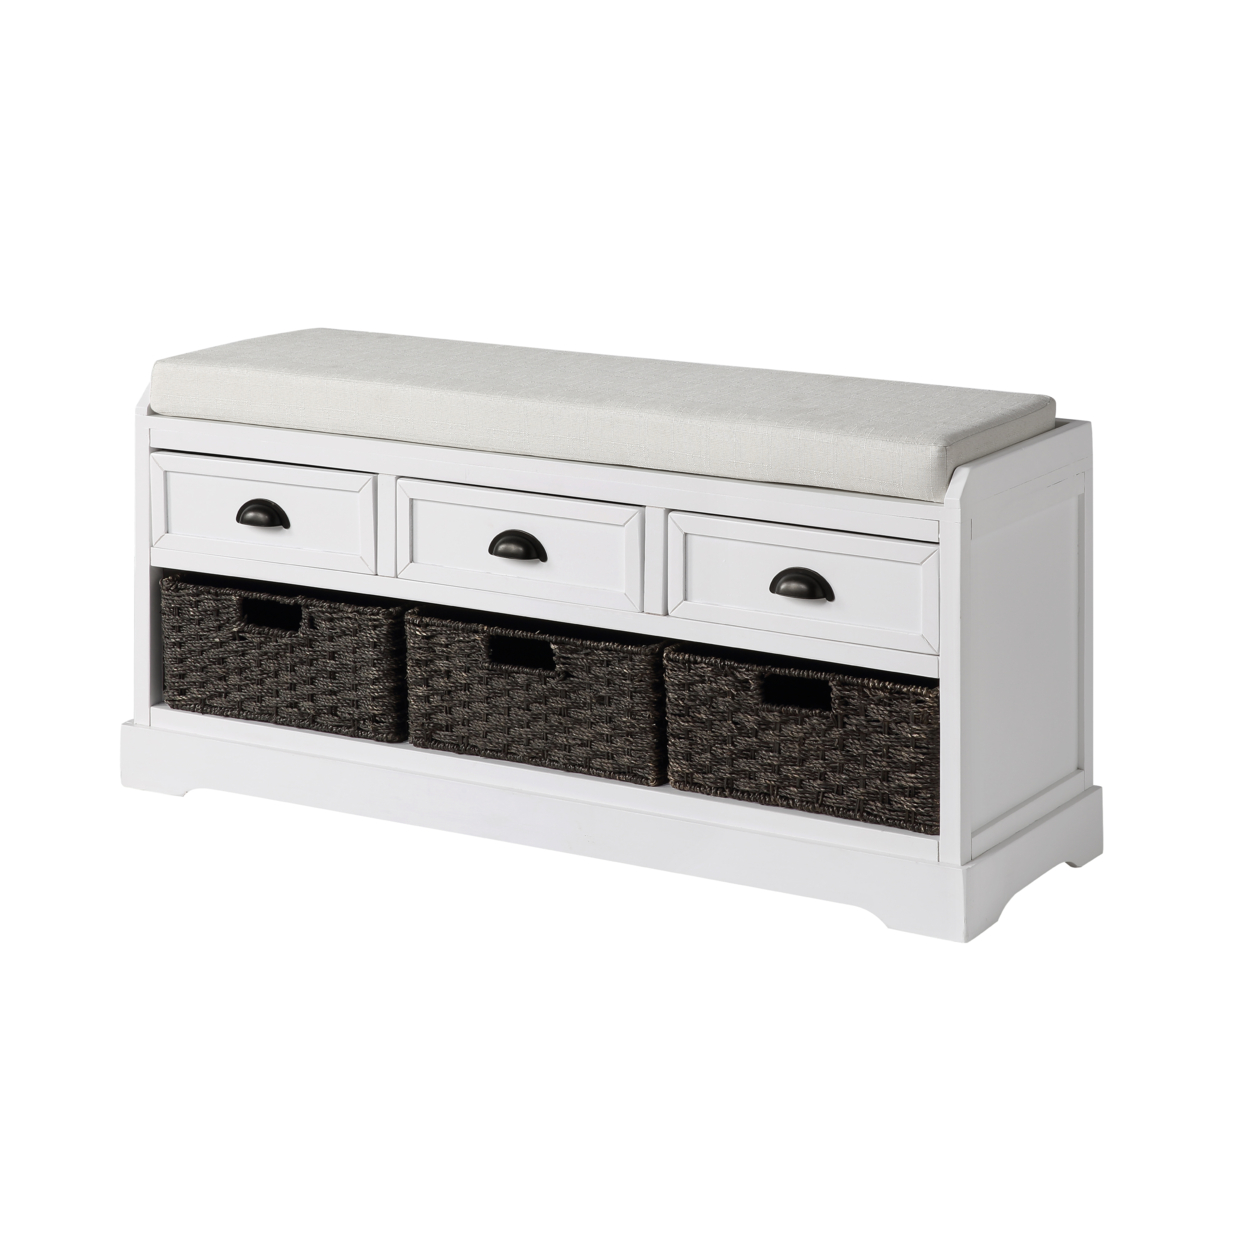 Bench with 3 Drawers and 3 Pull Out Woven Backets, White, Saltoro Sherpi